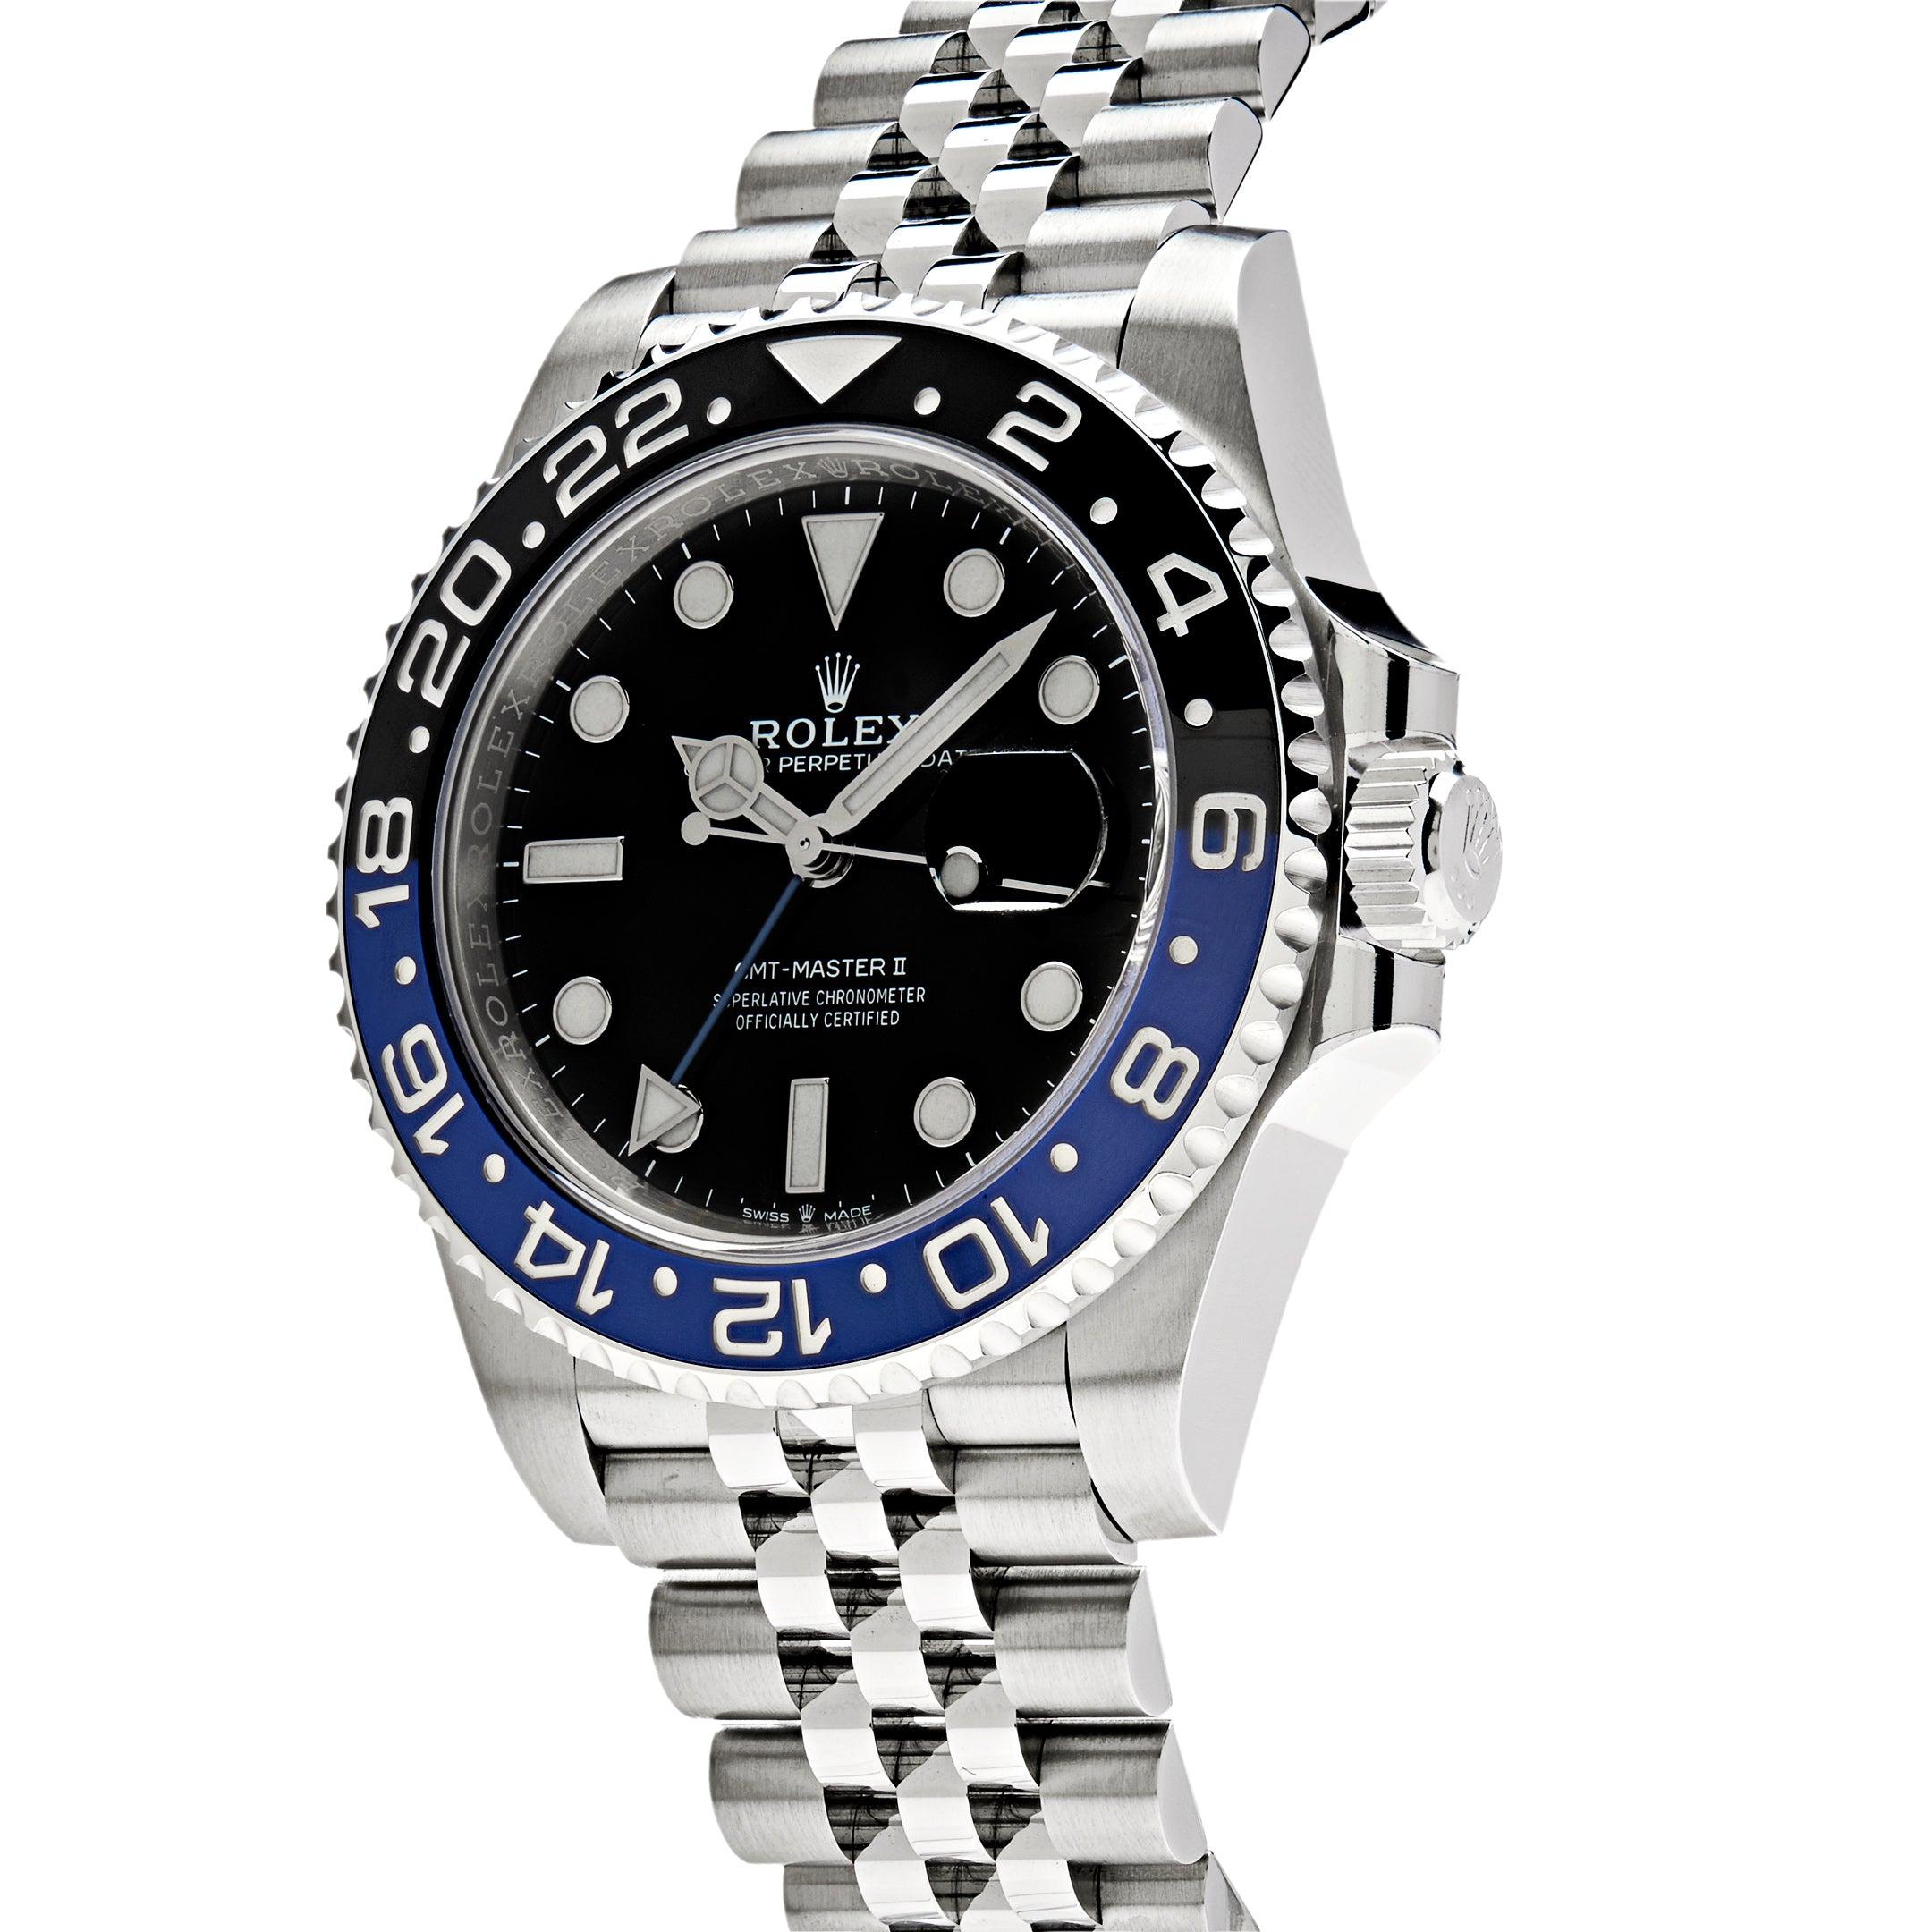 The Rolex GMT Master II 'Batman' features a 40mm stainless steel case with a black and blue 24hr Cerachrom on the bidirectional bezel. Its black dial and white luminous hour markers elevates this design, attracting a world of travelers. The watch